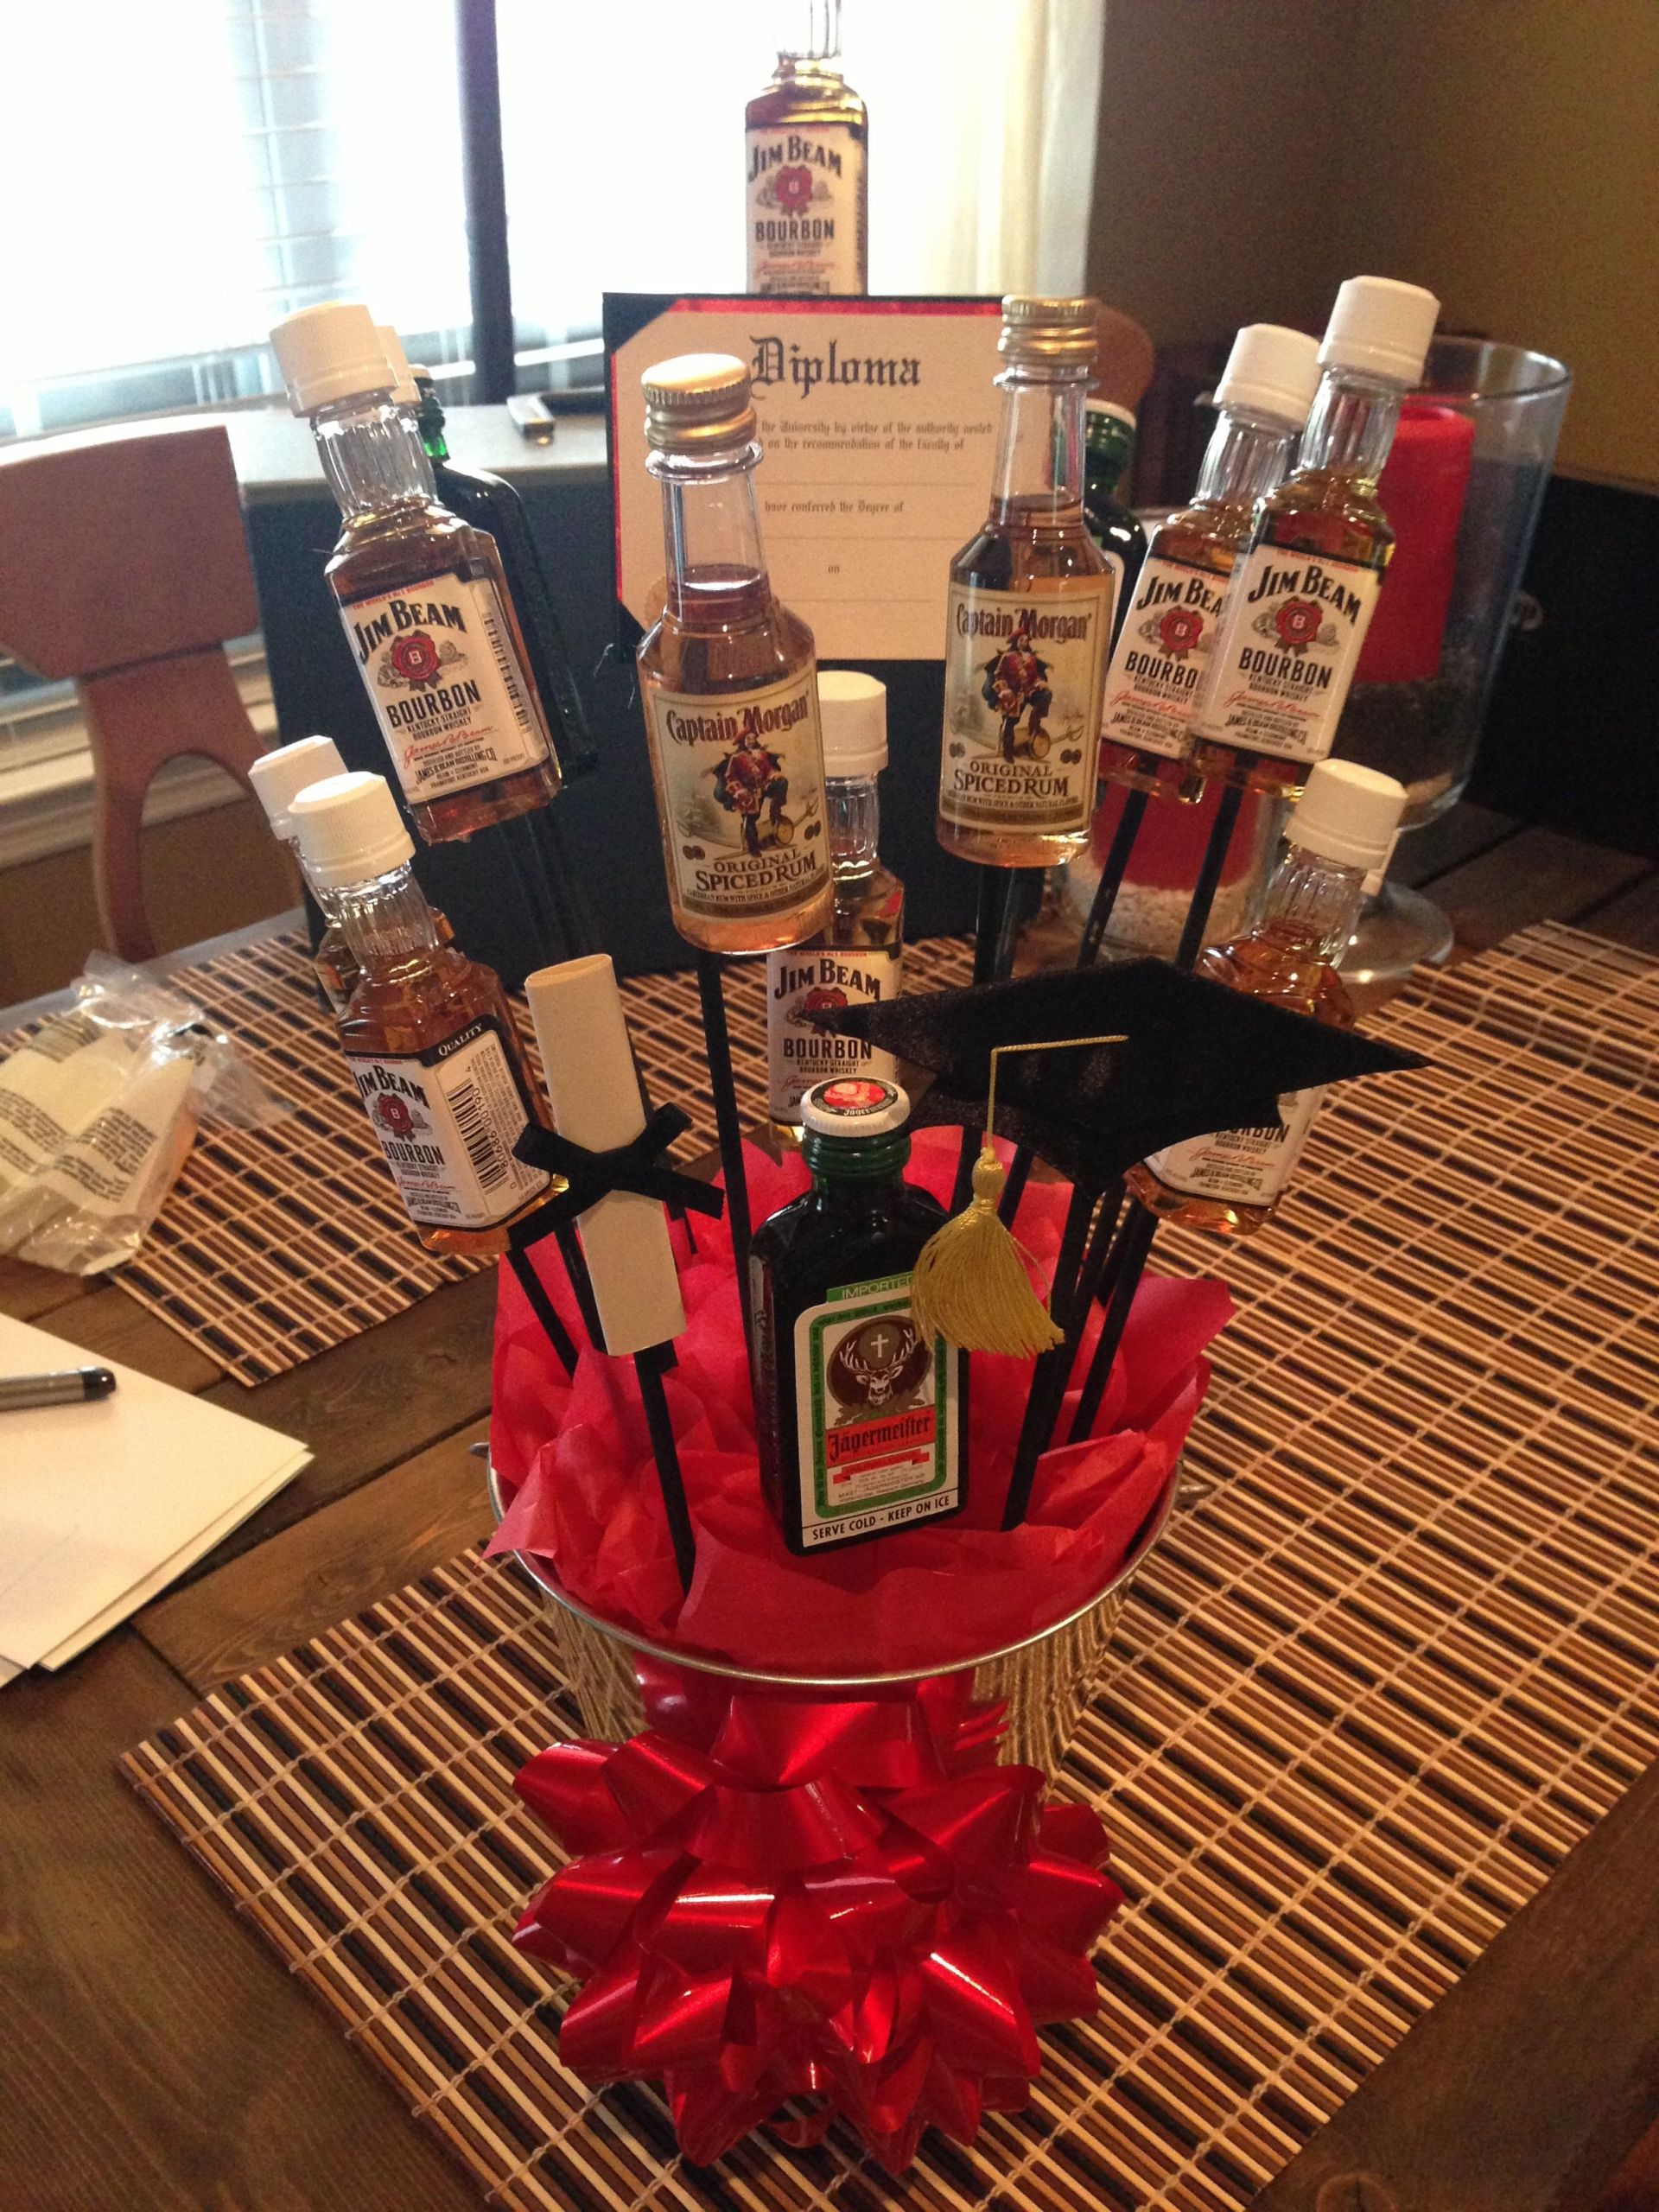 Pinterest Graduation Party Ideas For Guys
 Alcohol bouquet for a guy graduating college